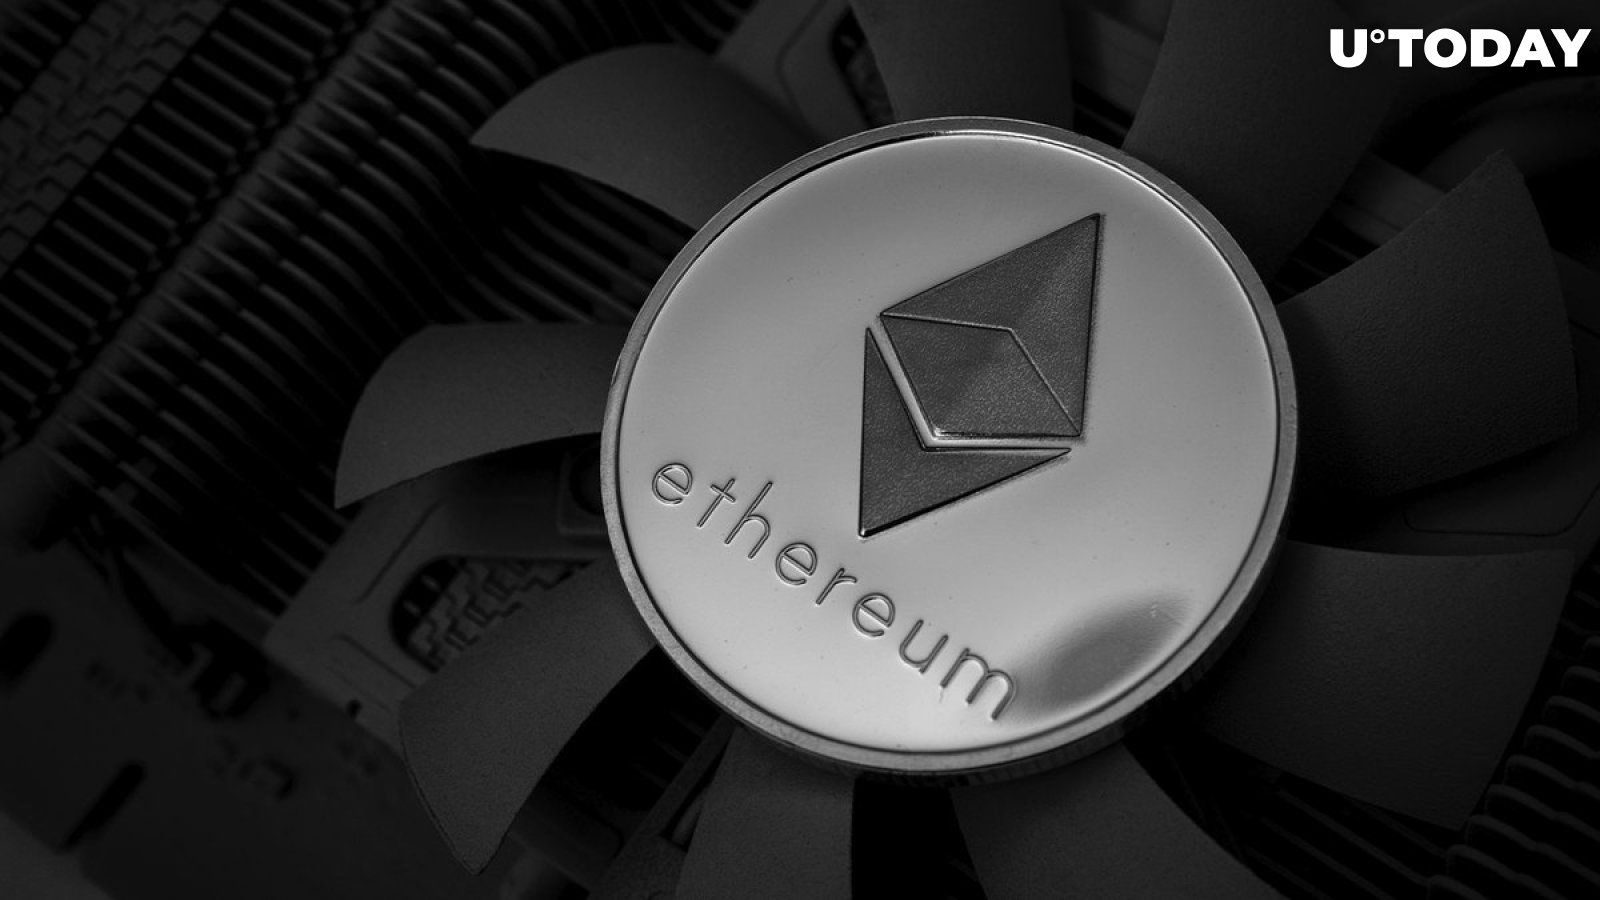 Ethereum (ETH) Inflation at Almost 5,000 ETH, But It Might Become Deflationary Again